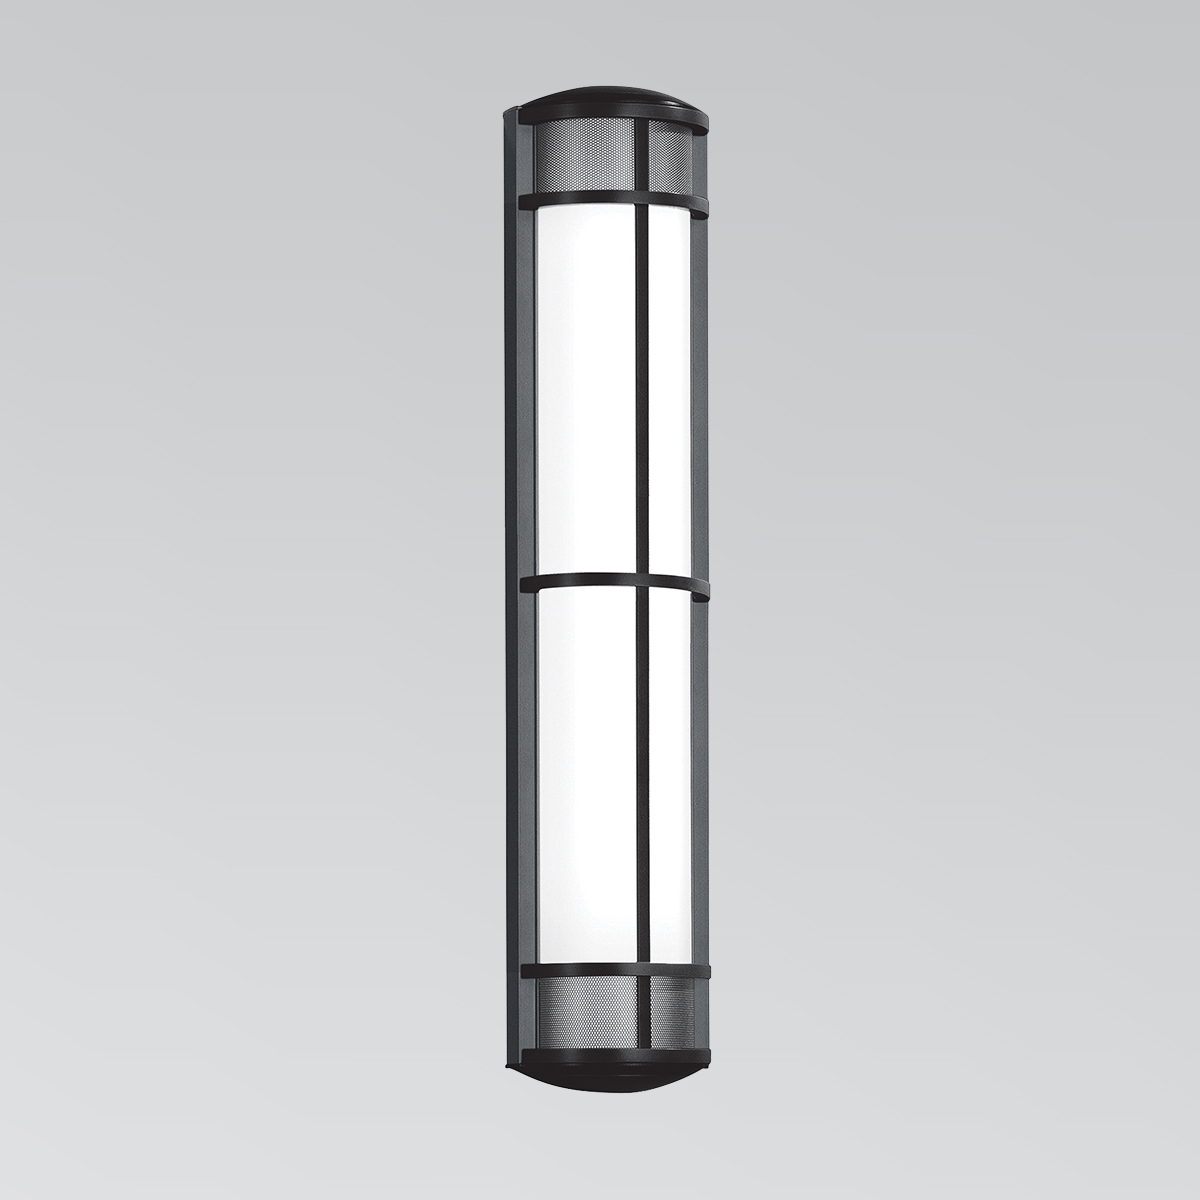 Avatar OW1335 wall outdoor sconce lighting 36” perforated single bar